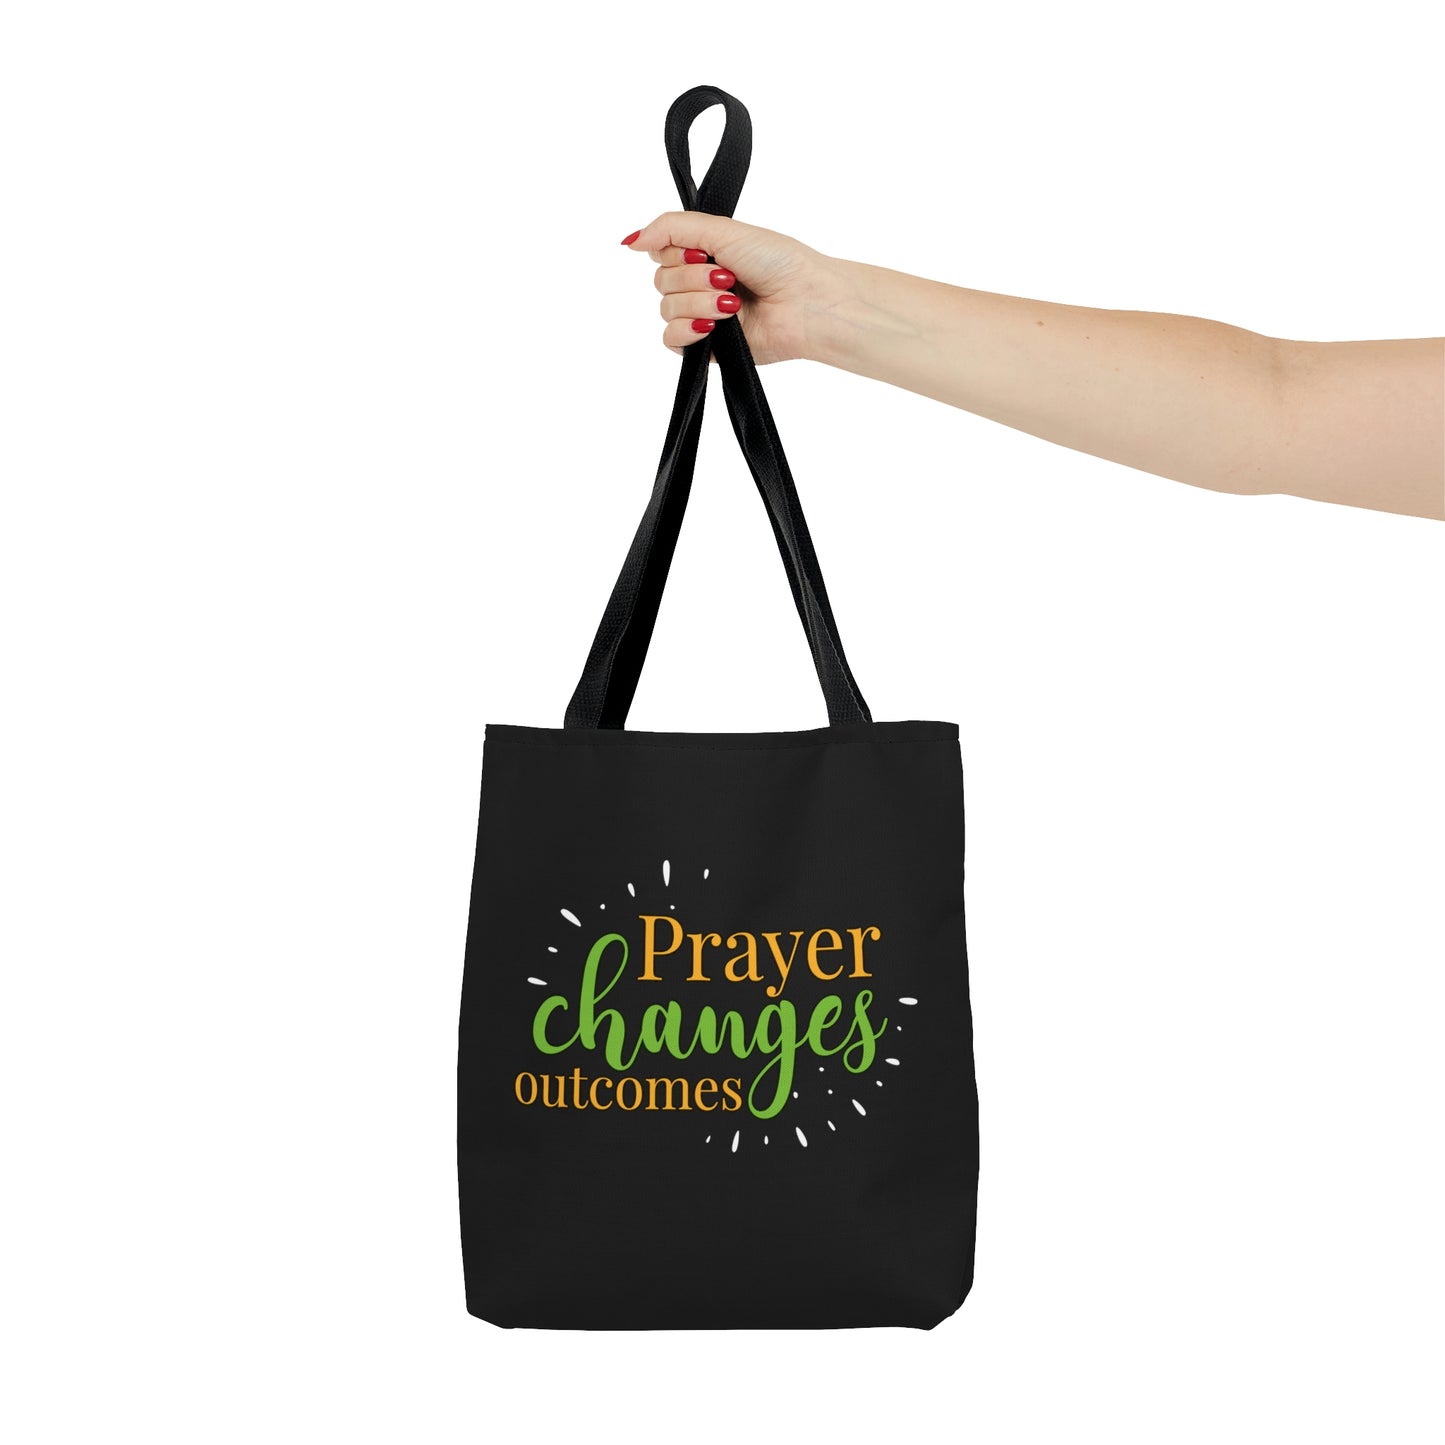 Prayer Changes Outcomes Tote Bag